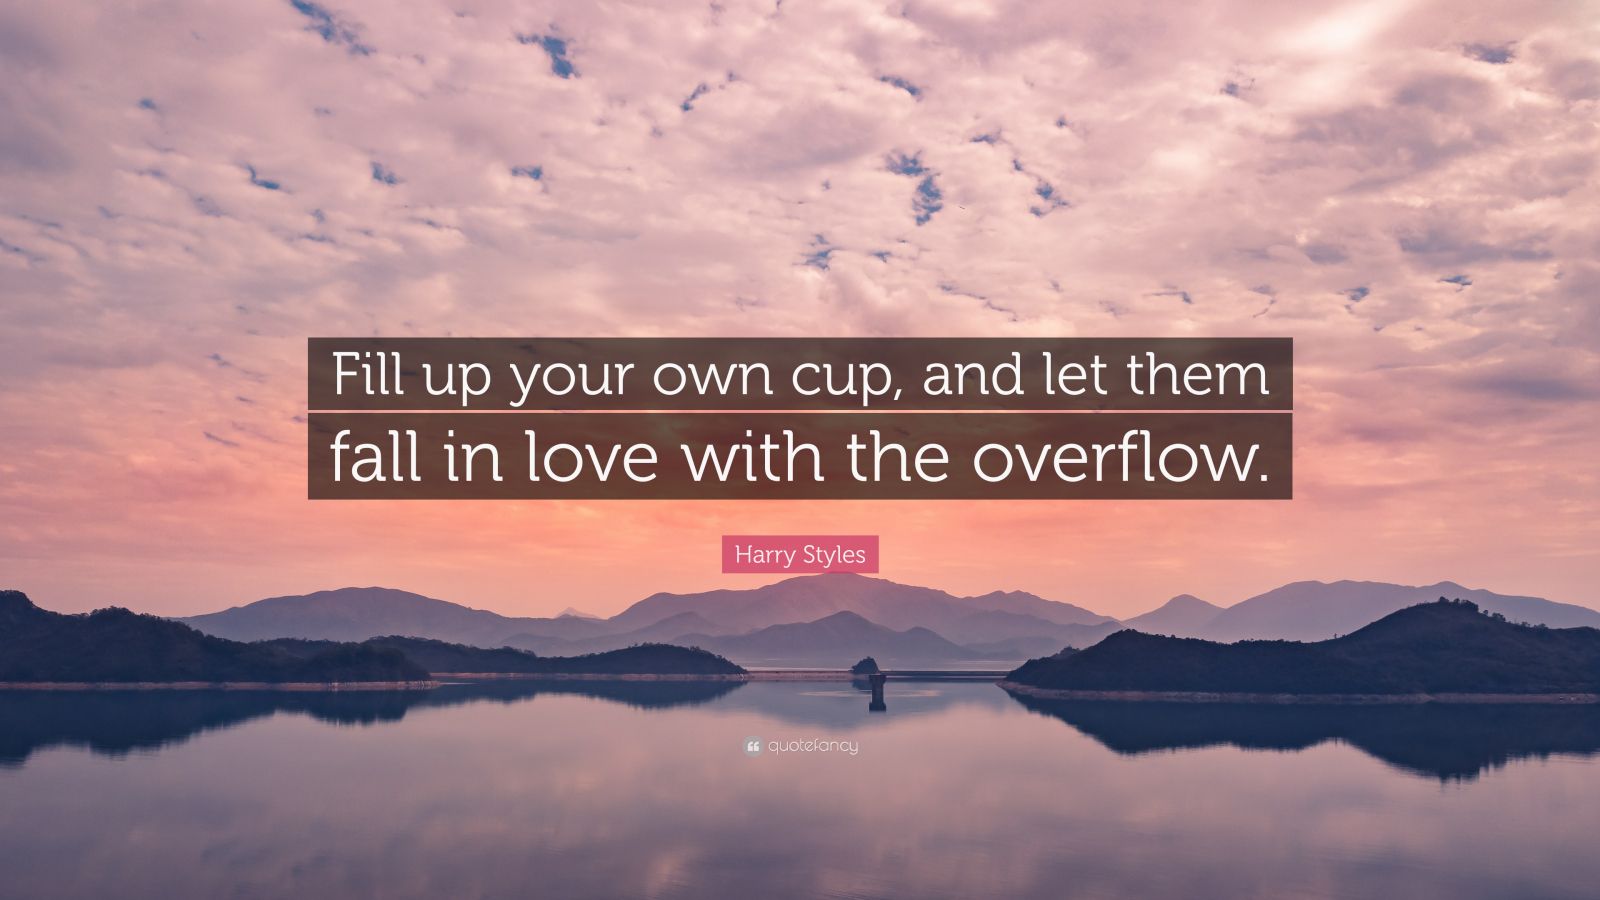 https://quotefancy.com/media/wallpaper/1600x900/7398577-Harry-Styles-Quote-Fill-up-your-own-cup-and-let-them-fall-in-love.jpg